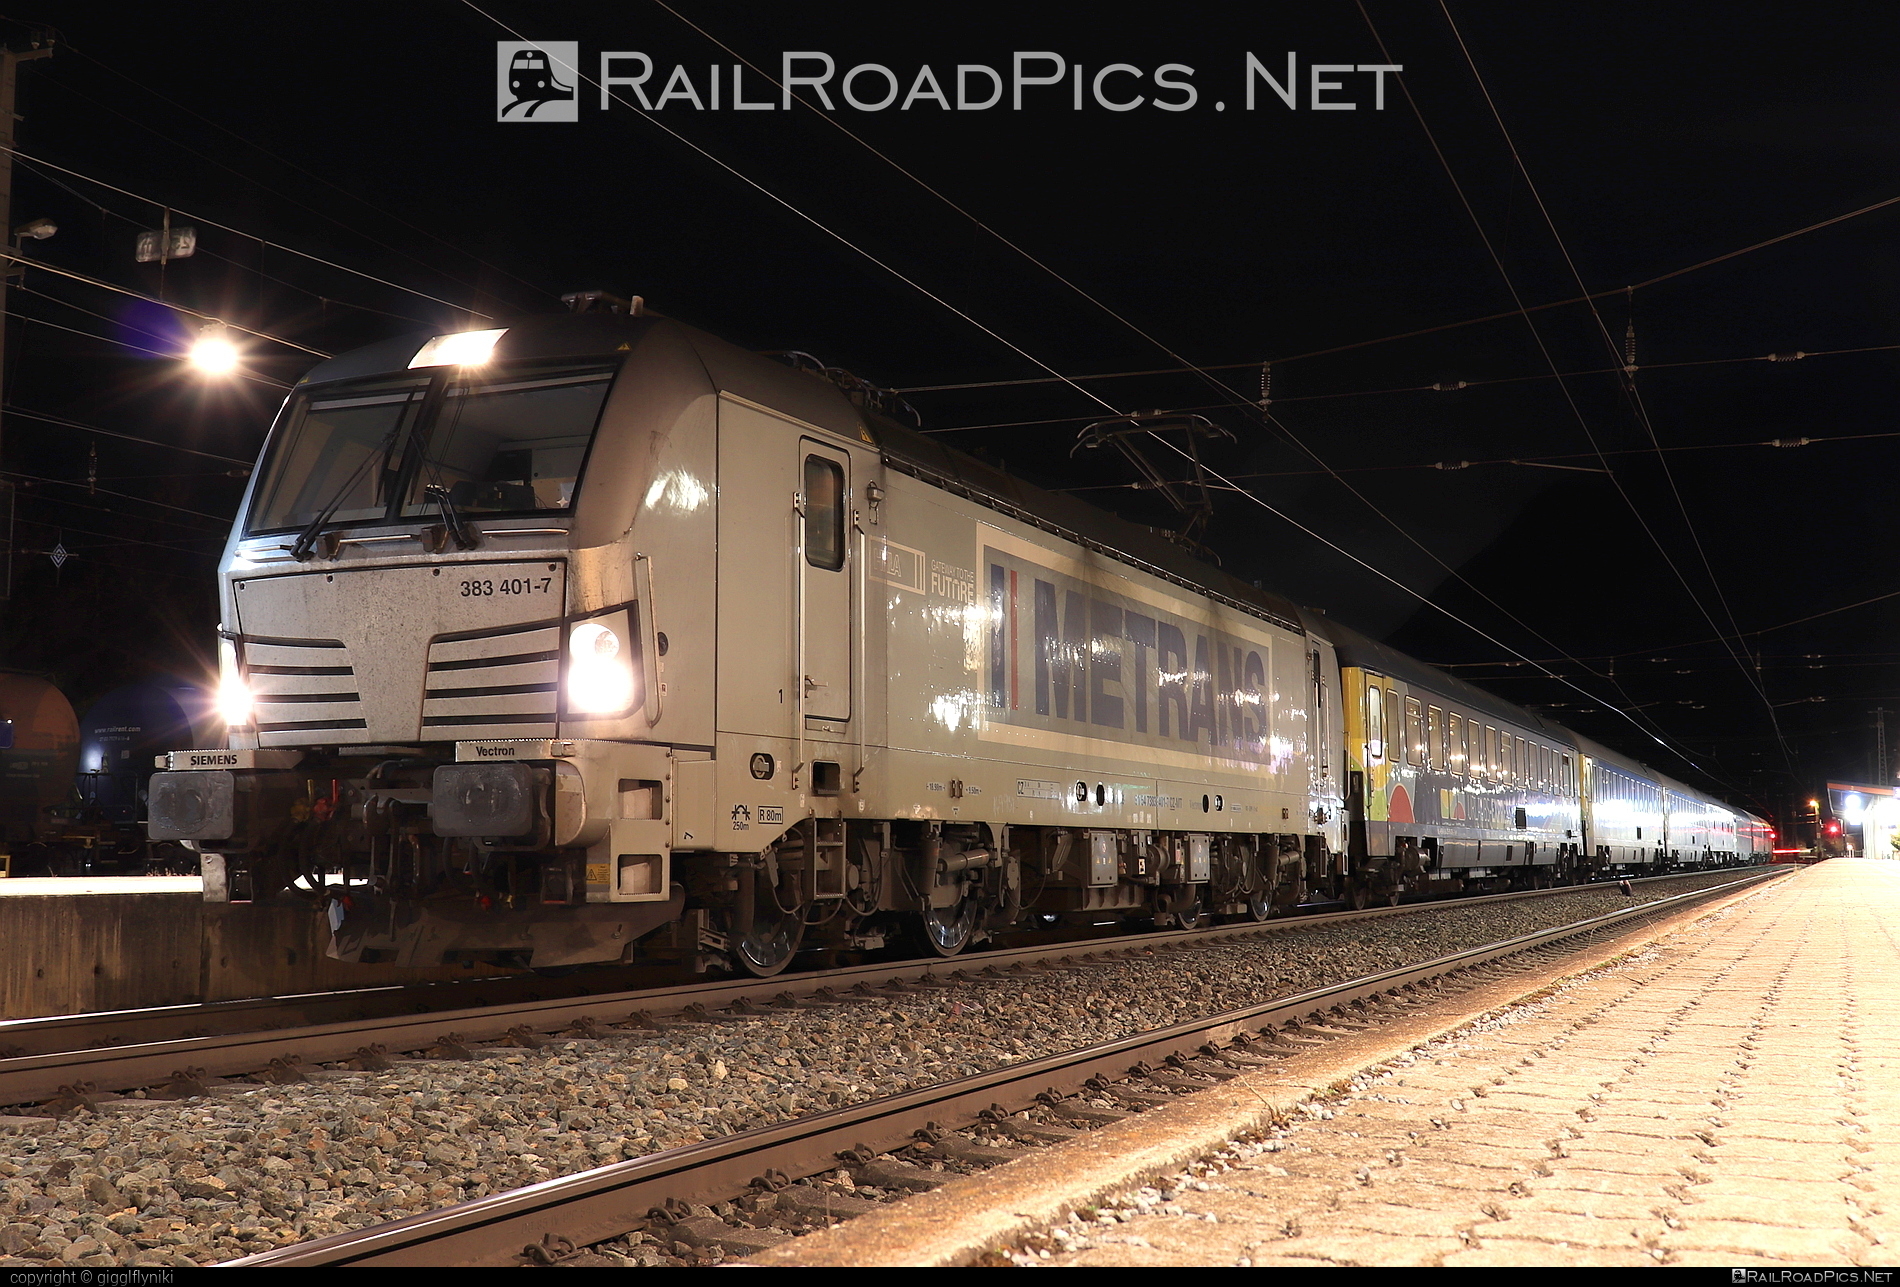 Siemens Vectron MS - 383 401-7 operated by METRANS, a.s. #hhla #metrans #siemens #siemensVectron #siemensVectronMS #urlaubsexpress #vectron #vectronMS